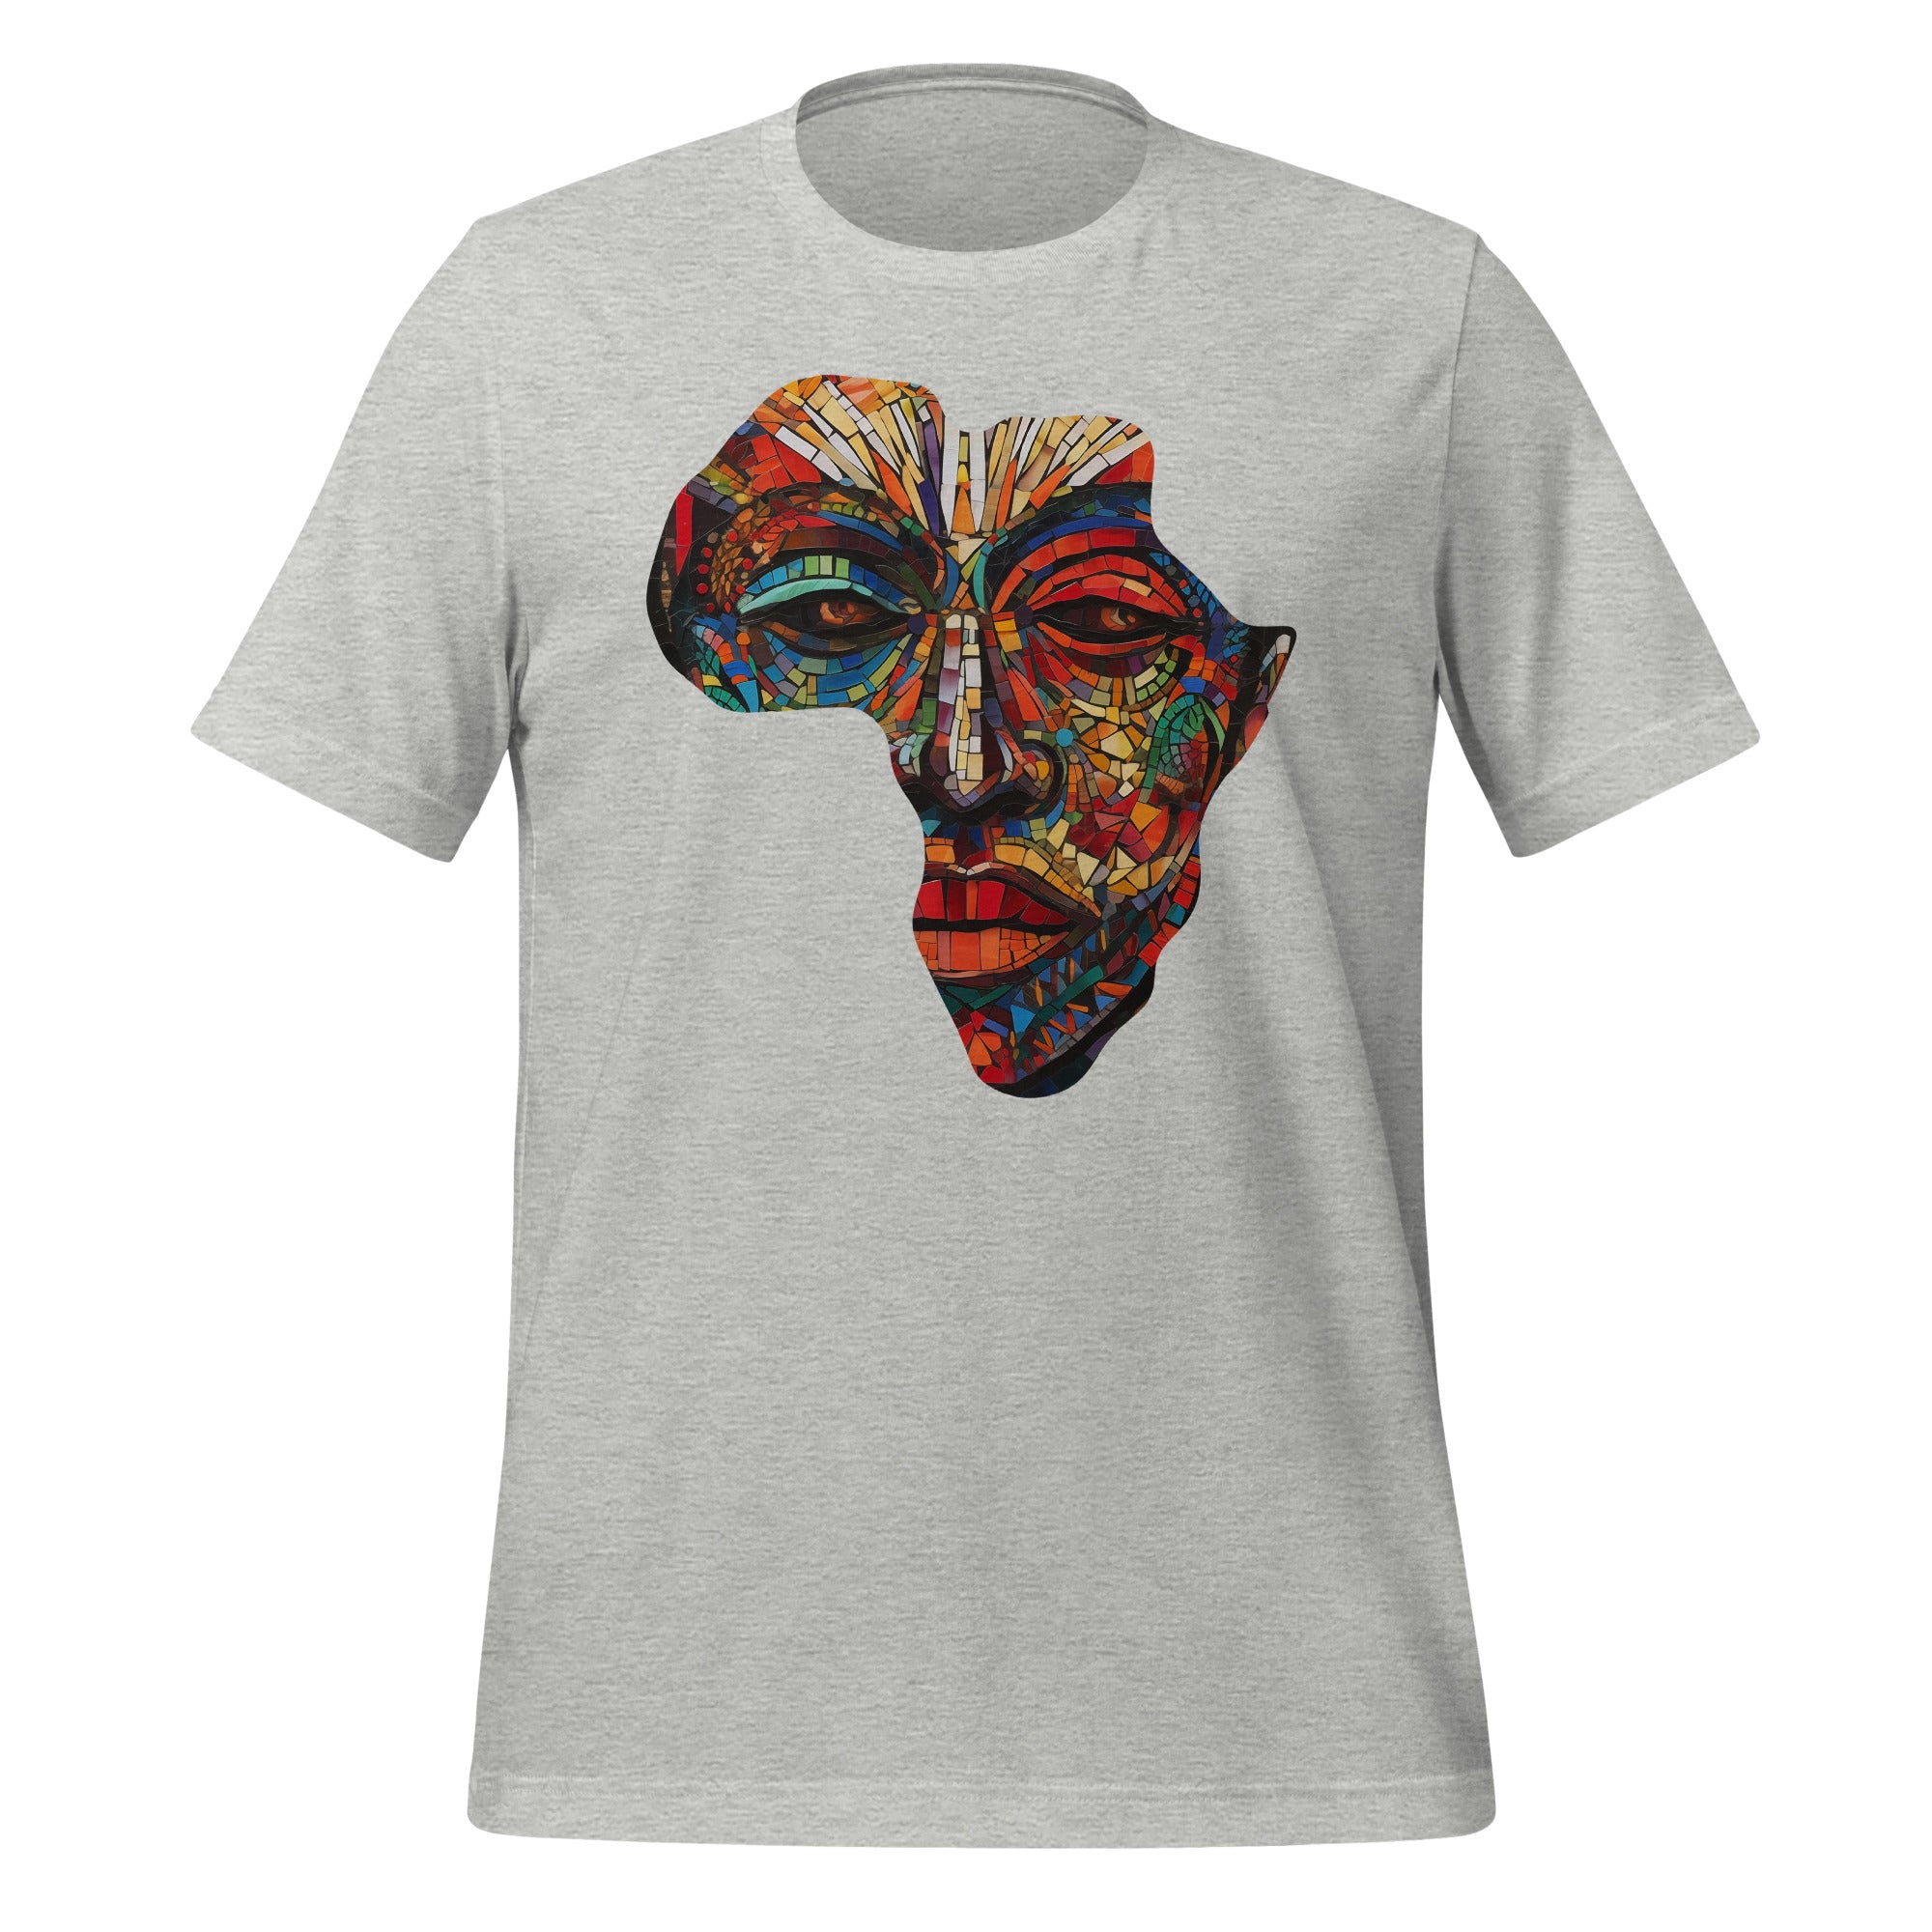 Map of Africa Tee Shirt - Abstract African Mask in athletic heather.